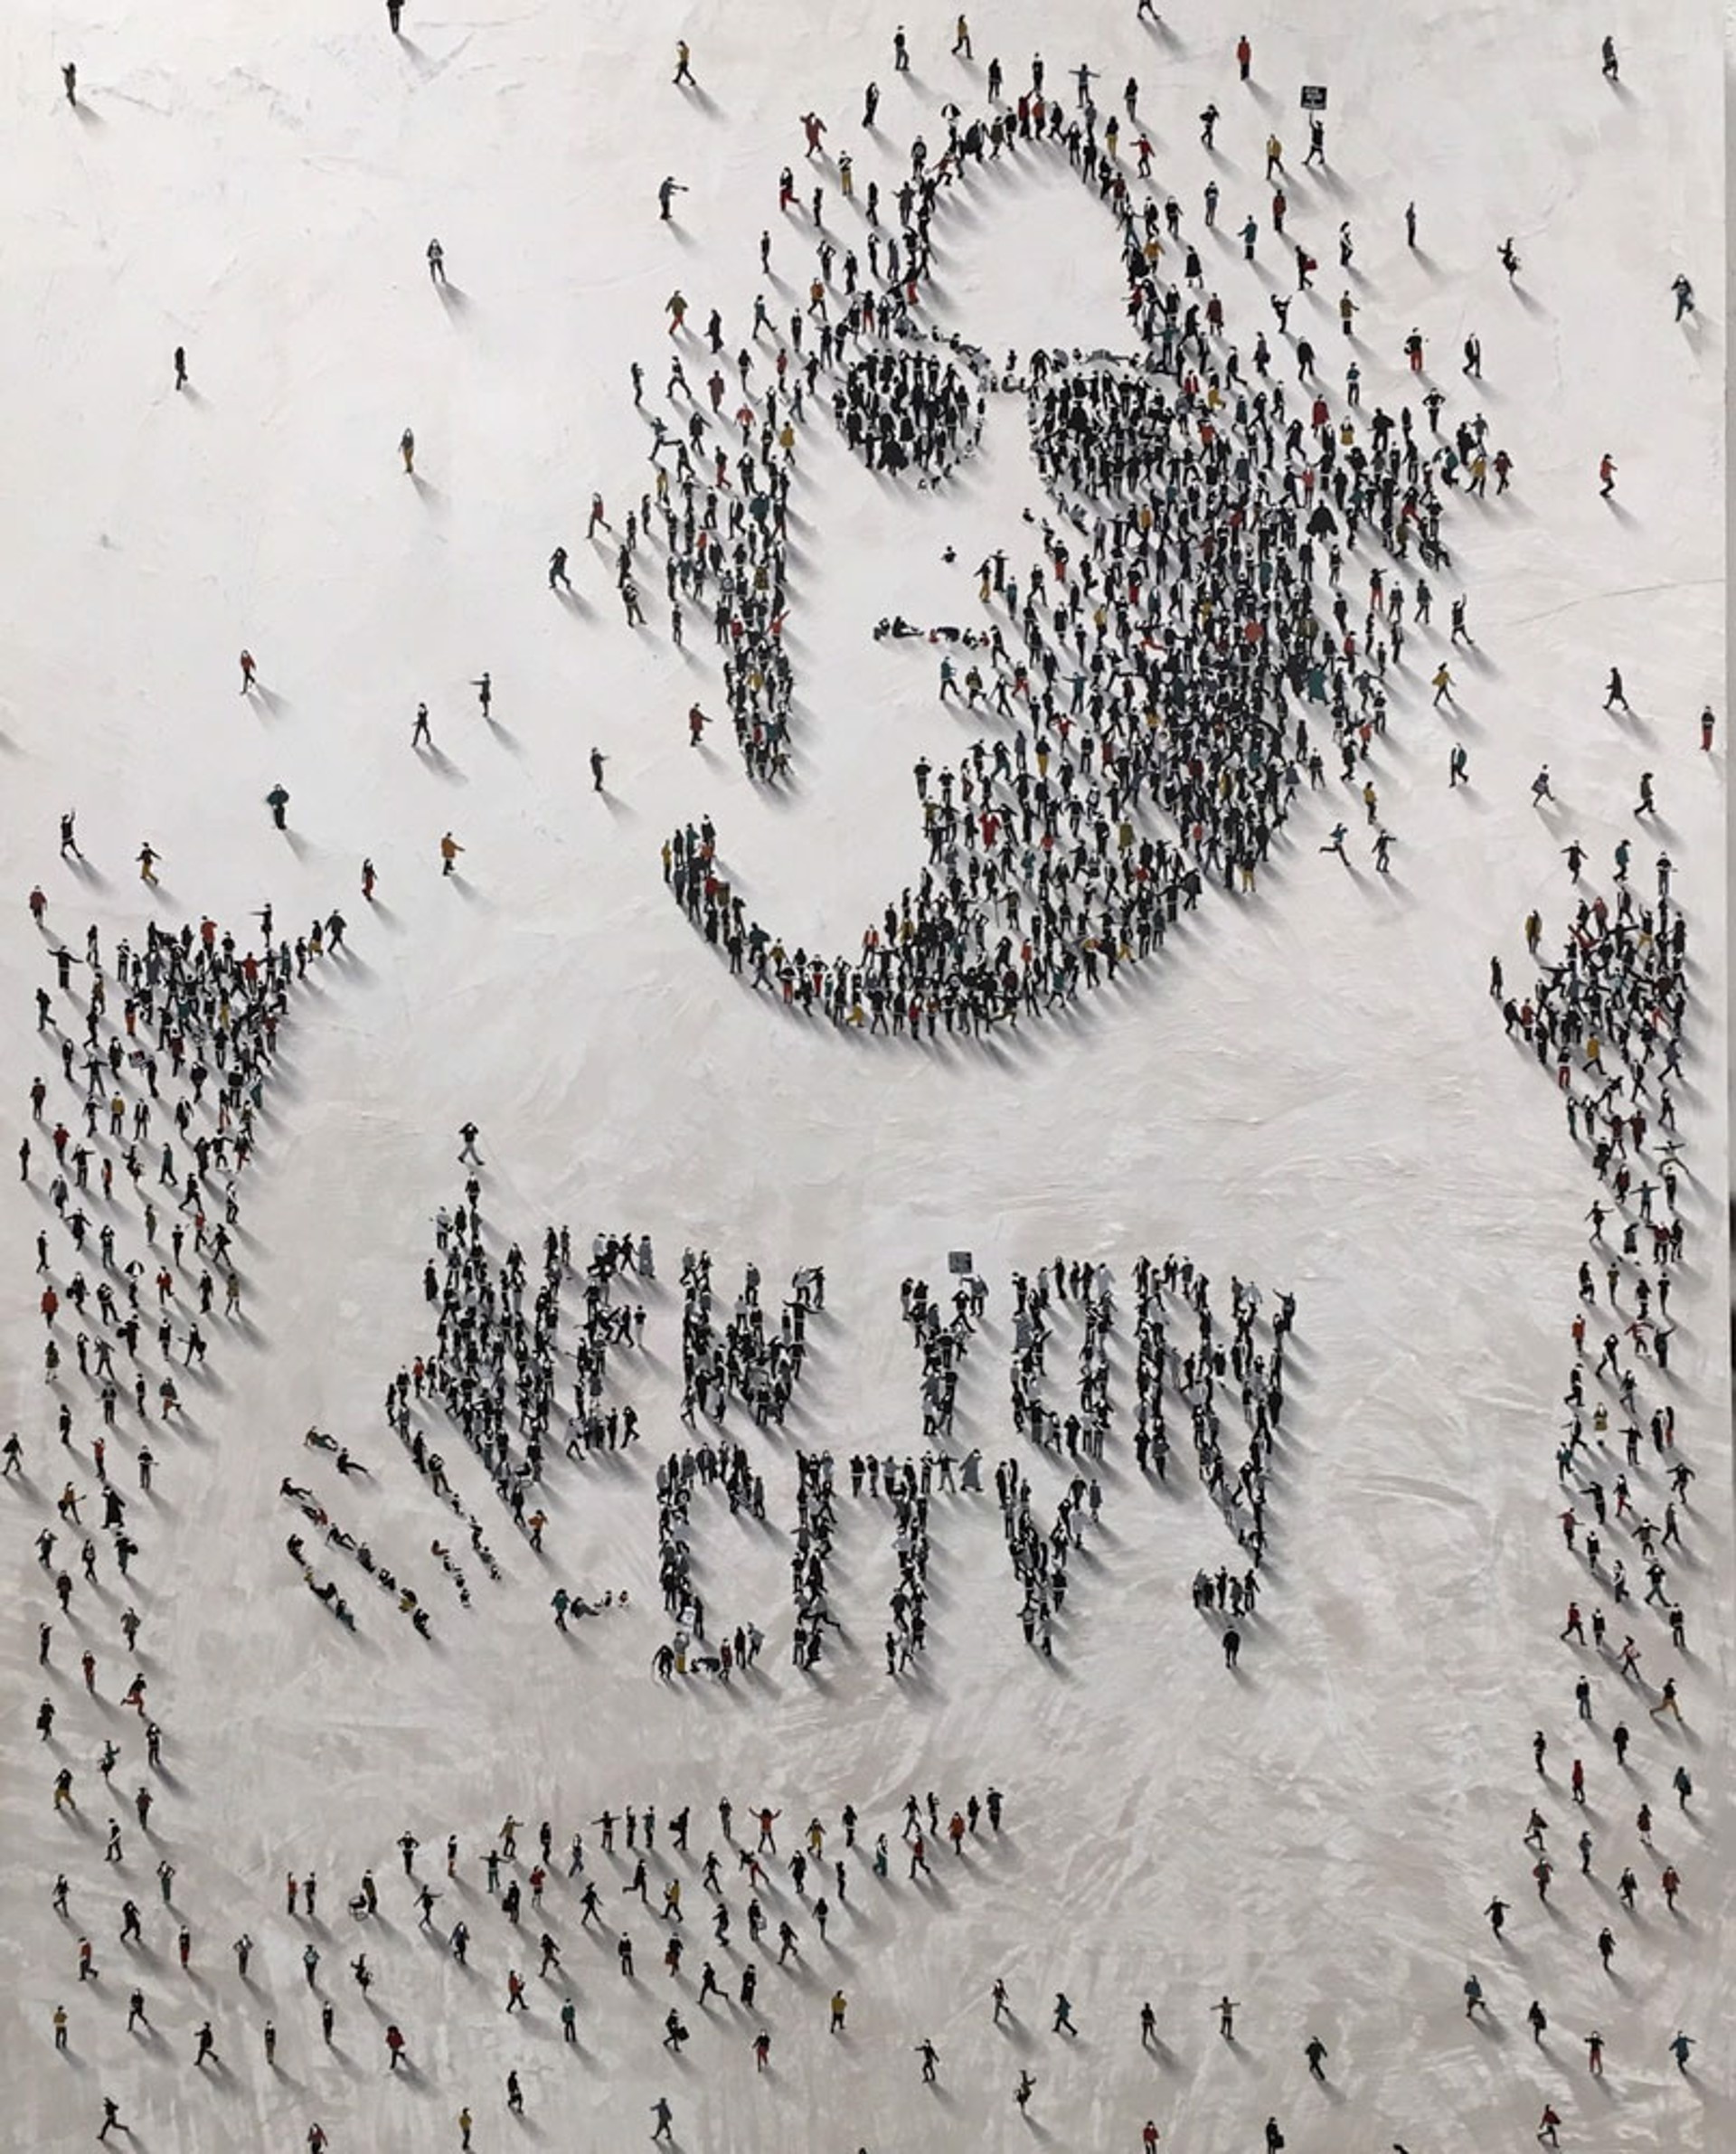 New York Tee (I'm Not the Only One) by Craig Alan, Populus Figurative